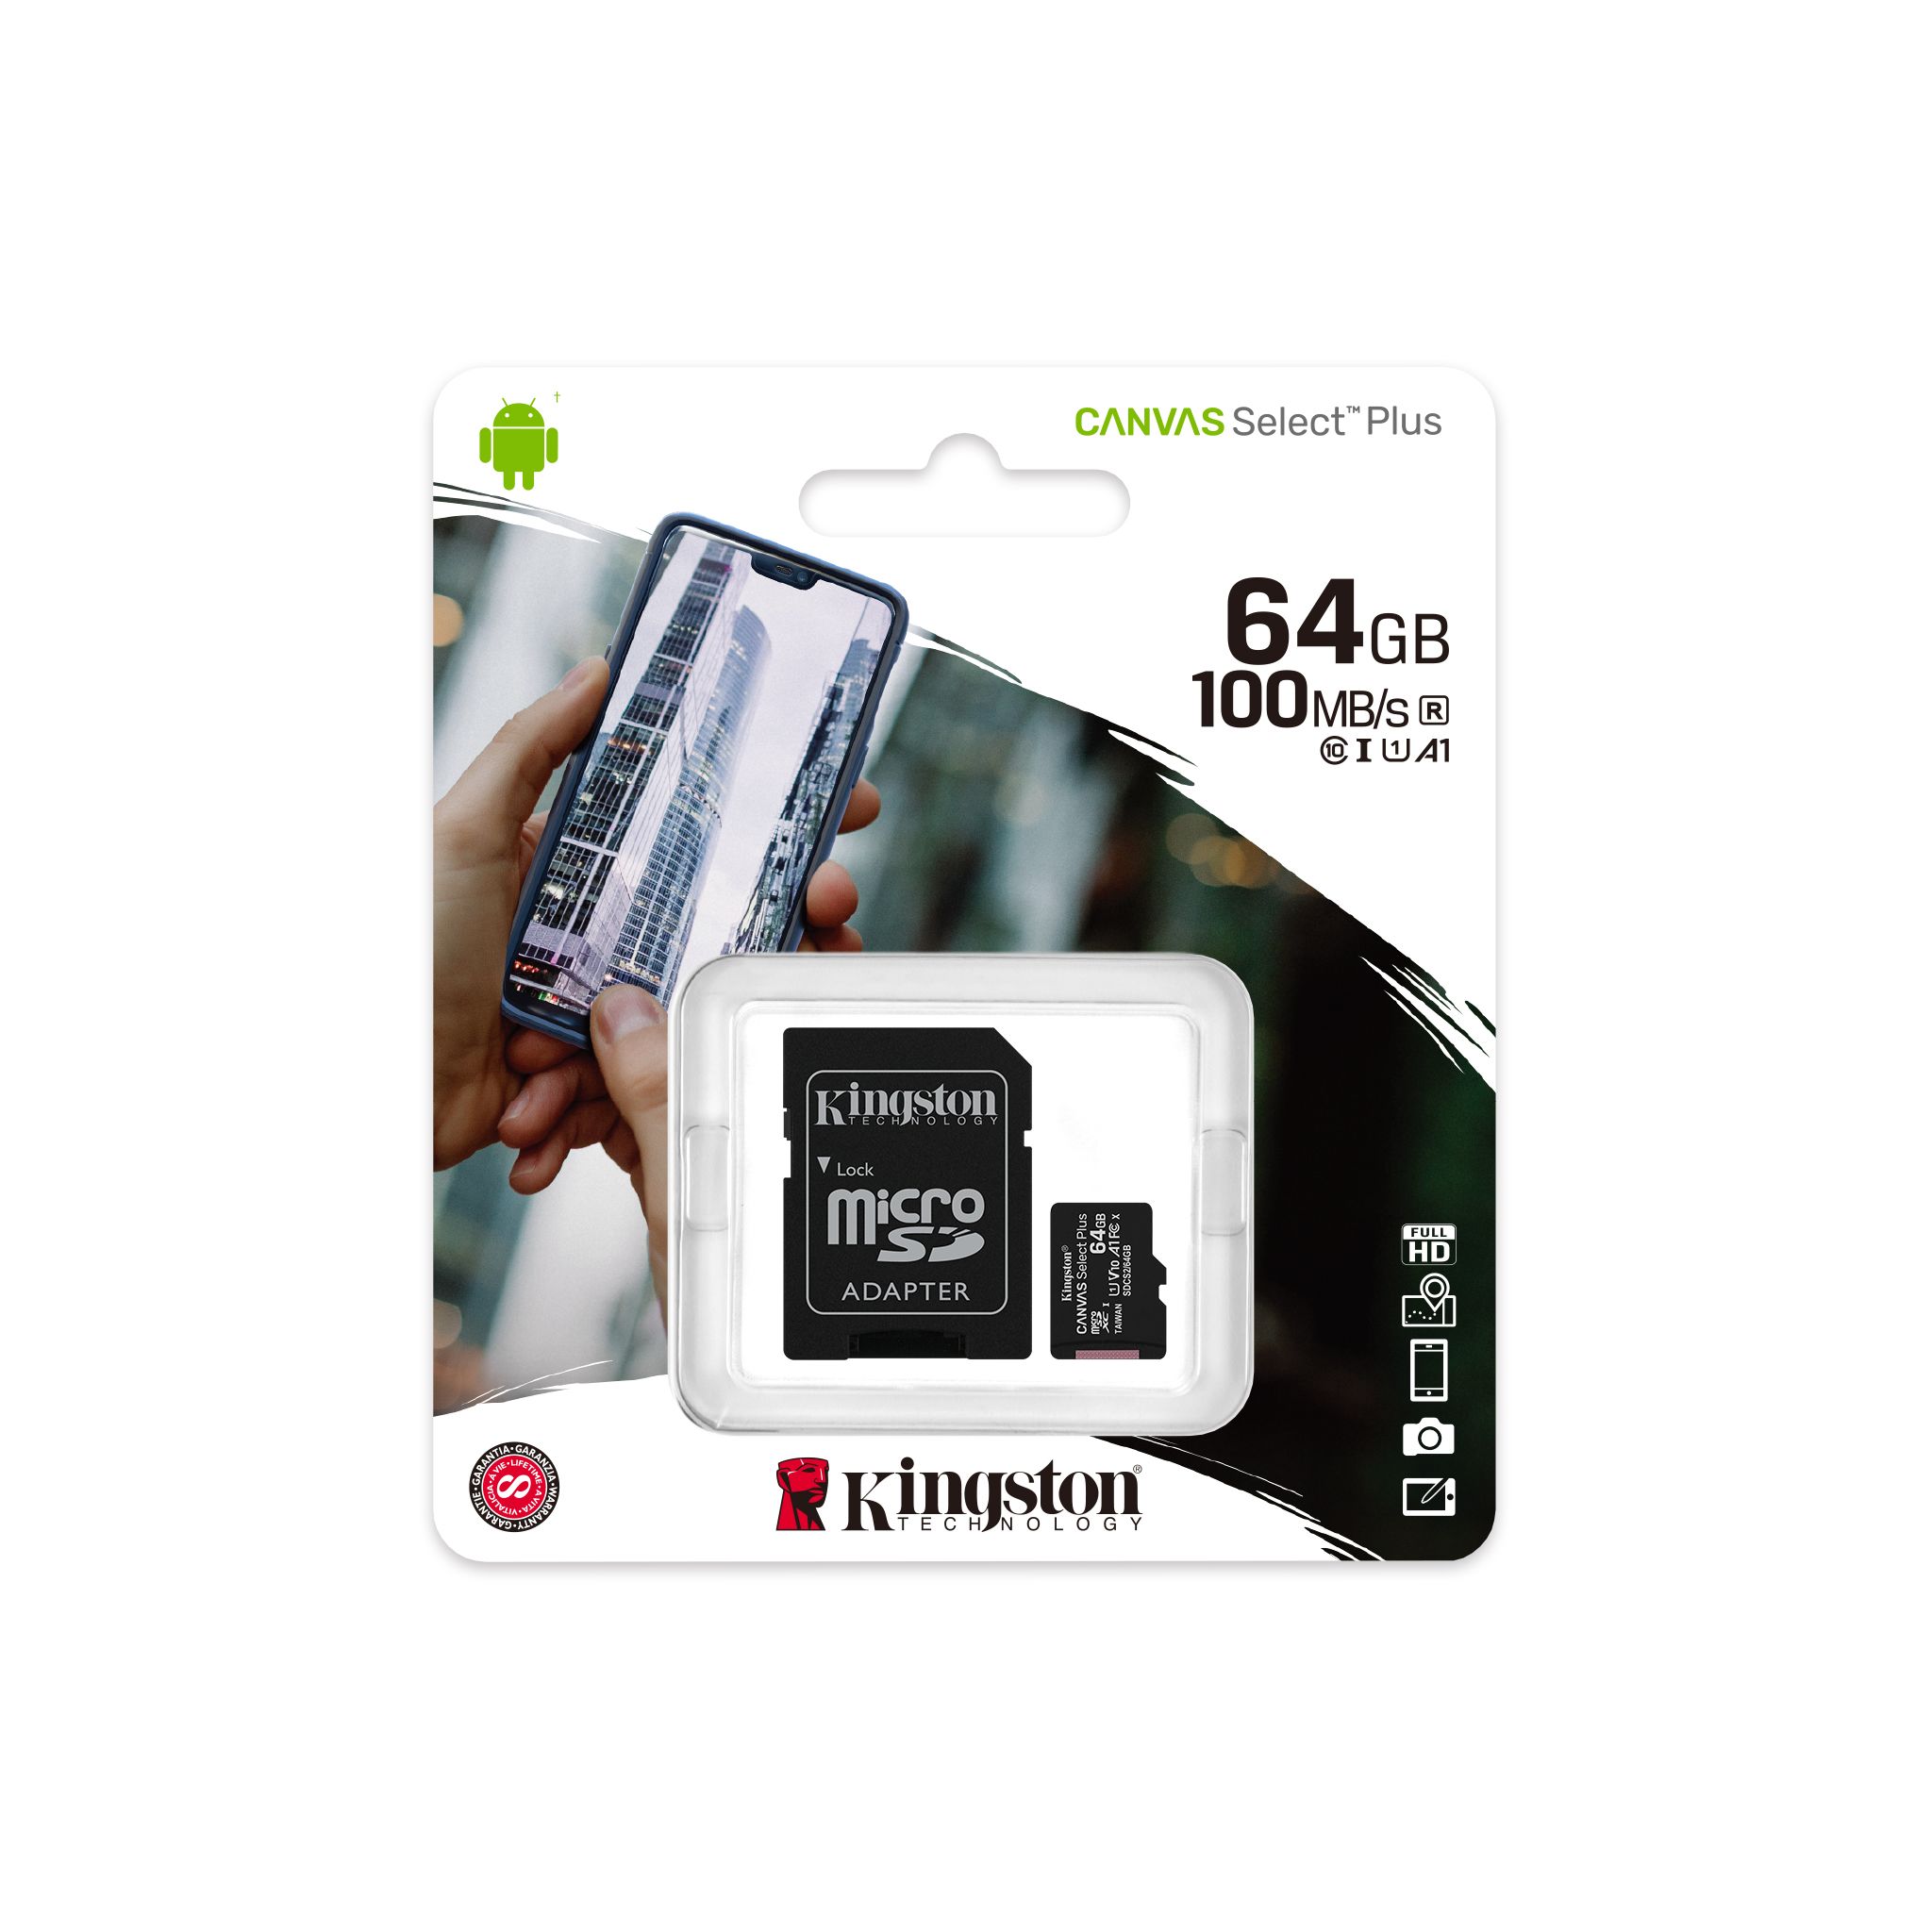 100MBs Works with Kingston Kingston 64GB Sony E2105 MicroSDXC Canvas Select Plus Card Verified by SanFlash.